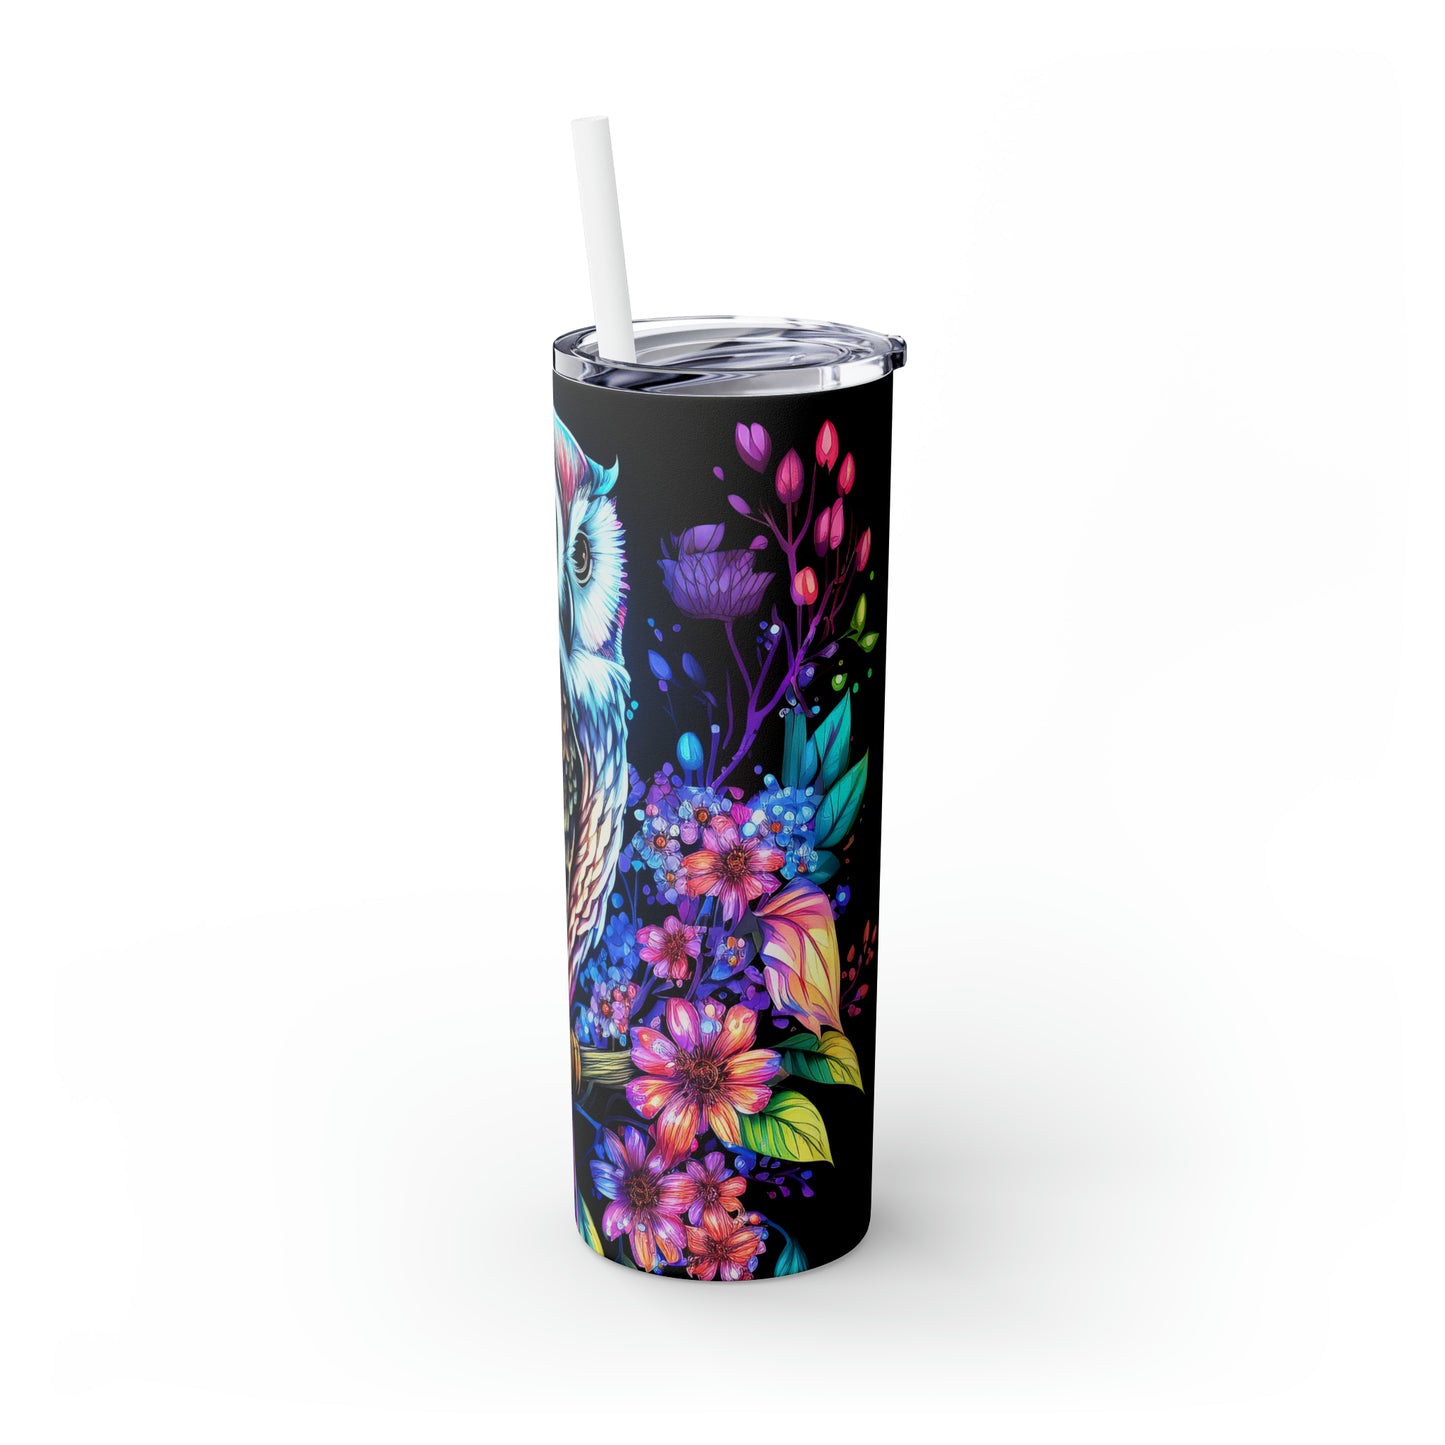 Colorful Owl - Skinny Tumbler with Straw, 20oz